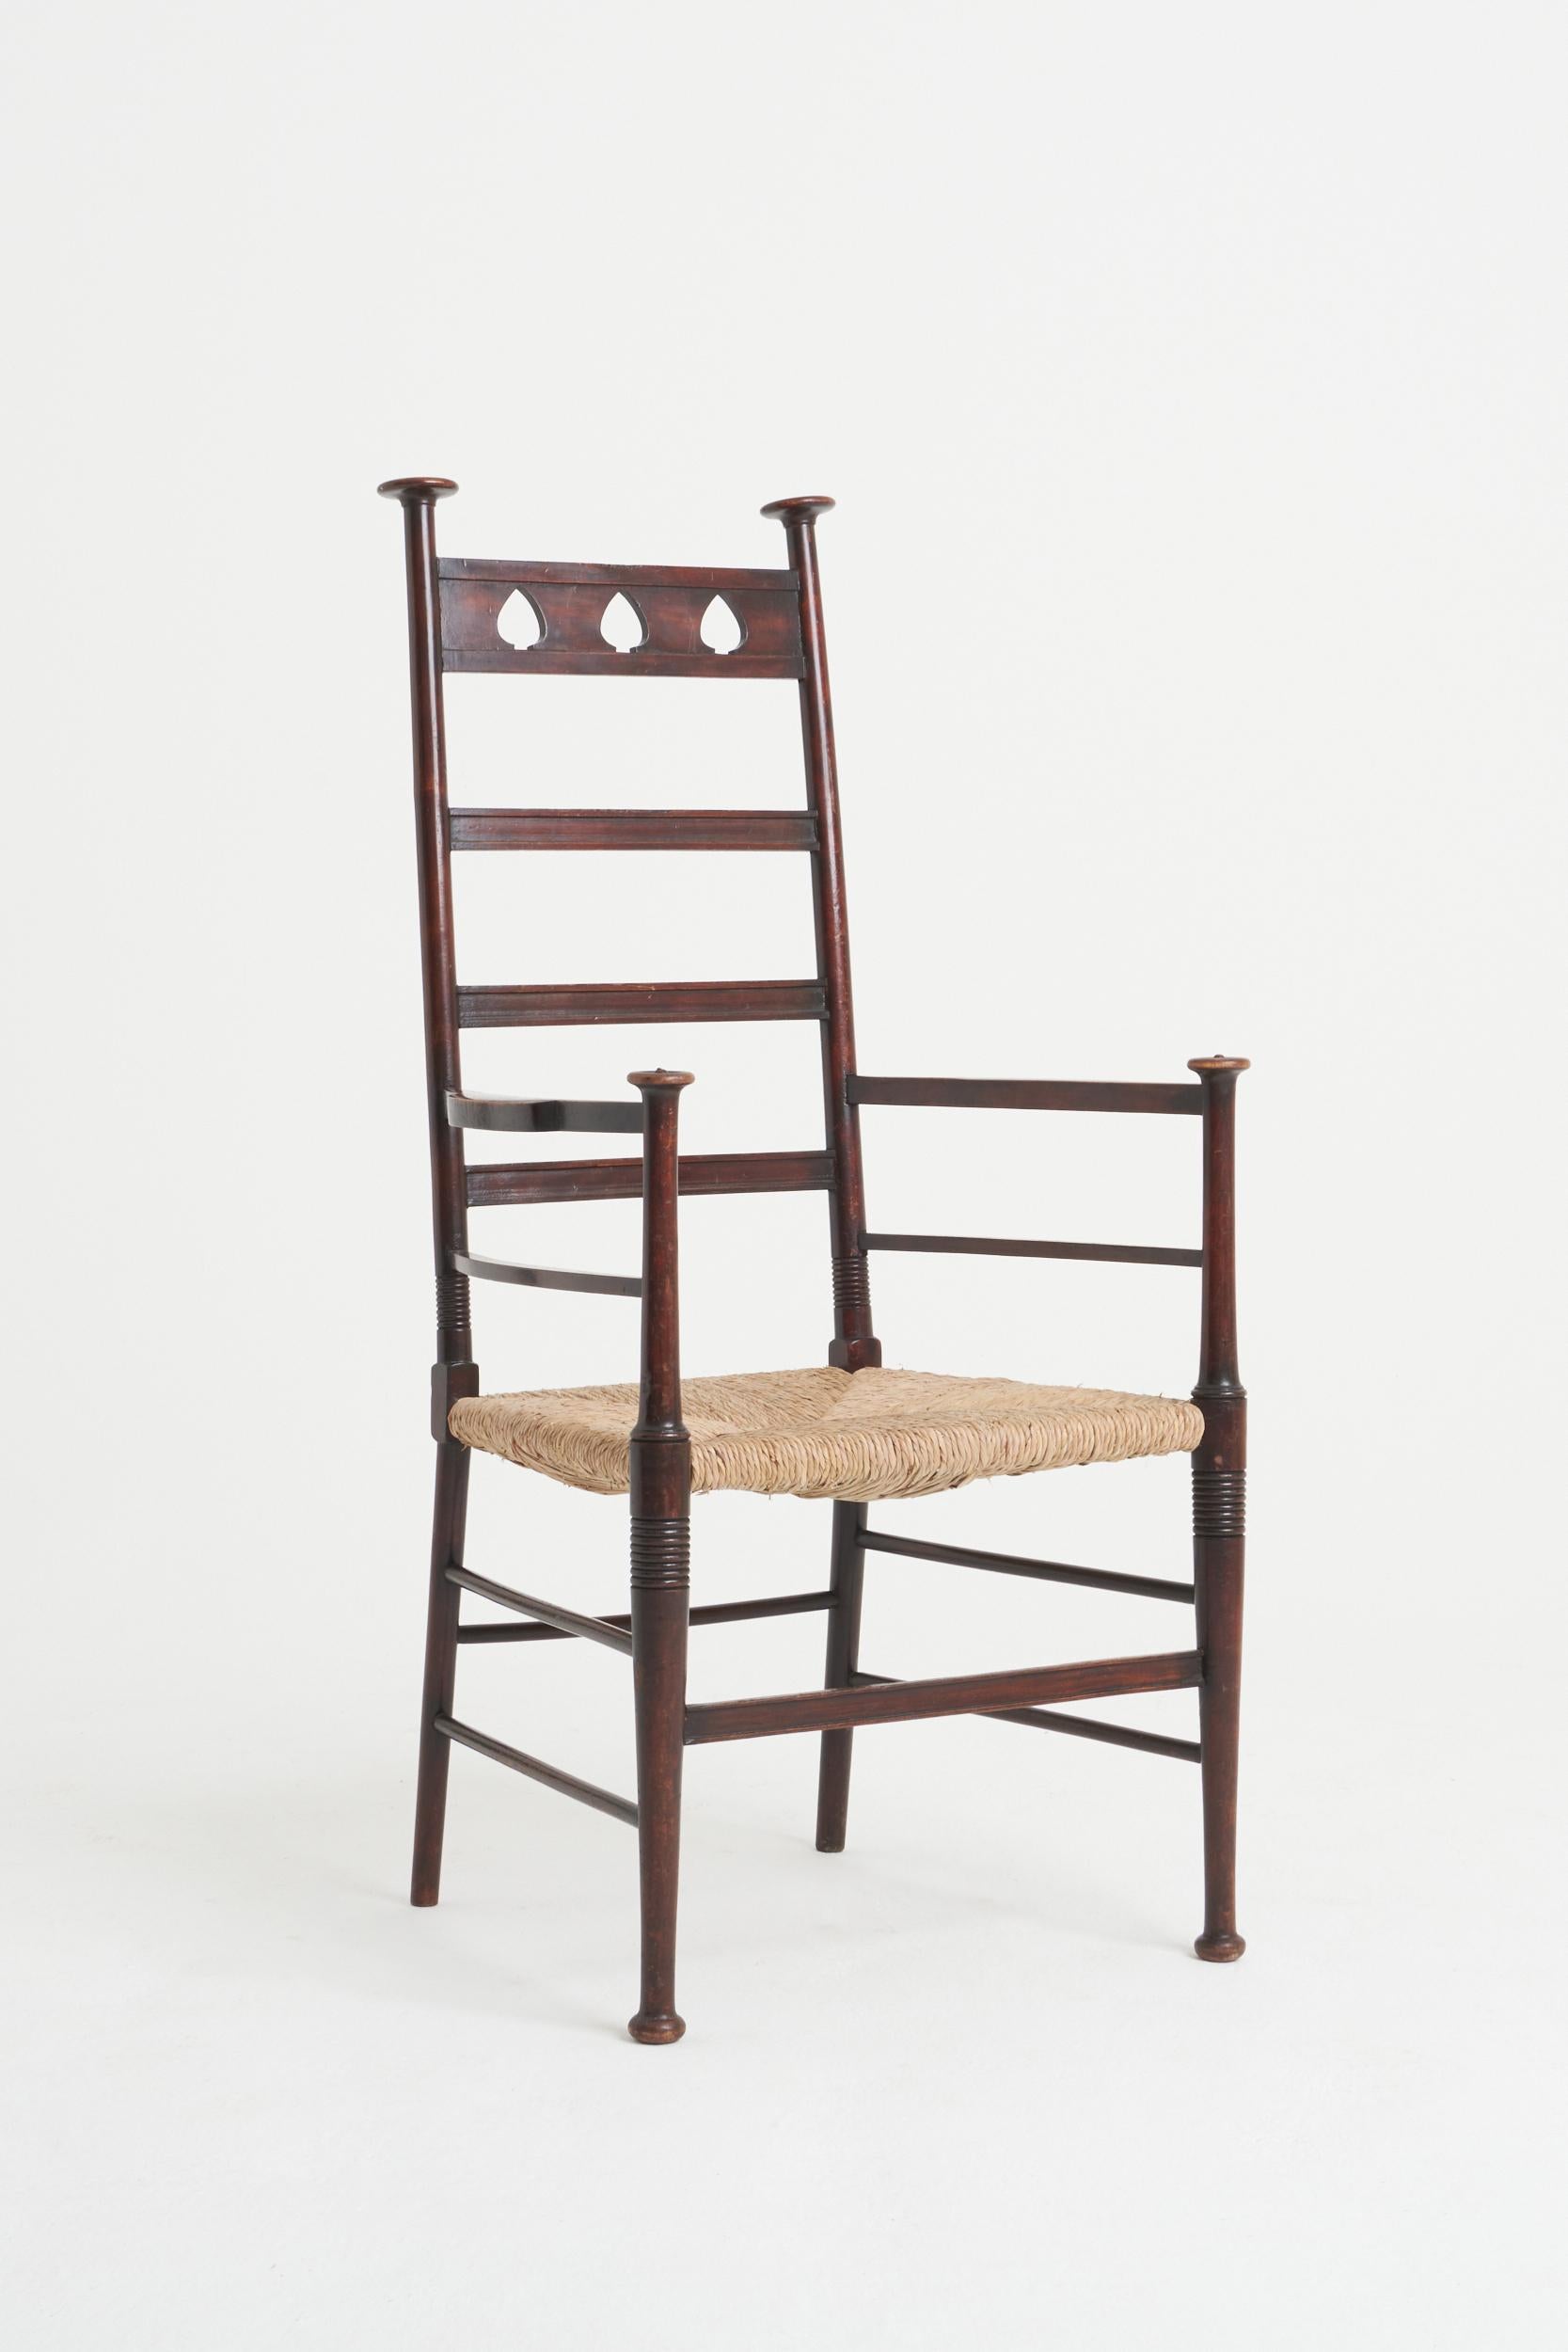 An Arts and Crafts Windsor chair.
Probably by William Birch, in the manner of Voysey.
England, circa 1900.